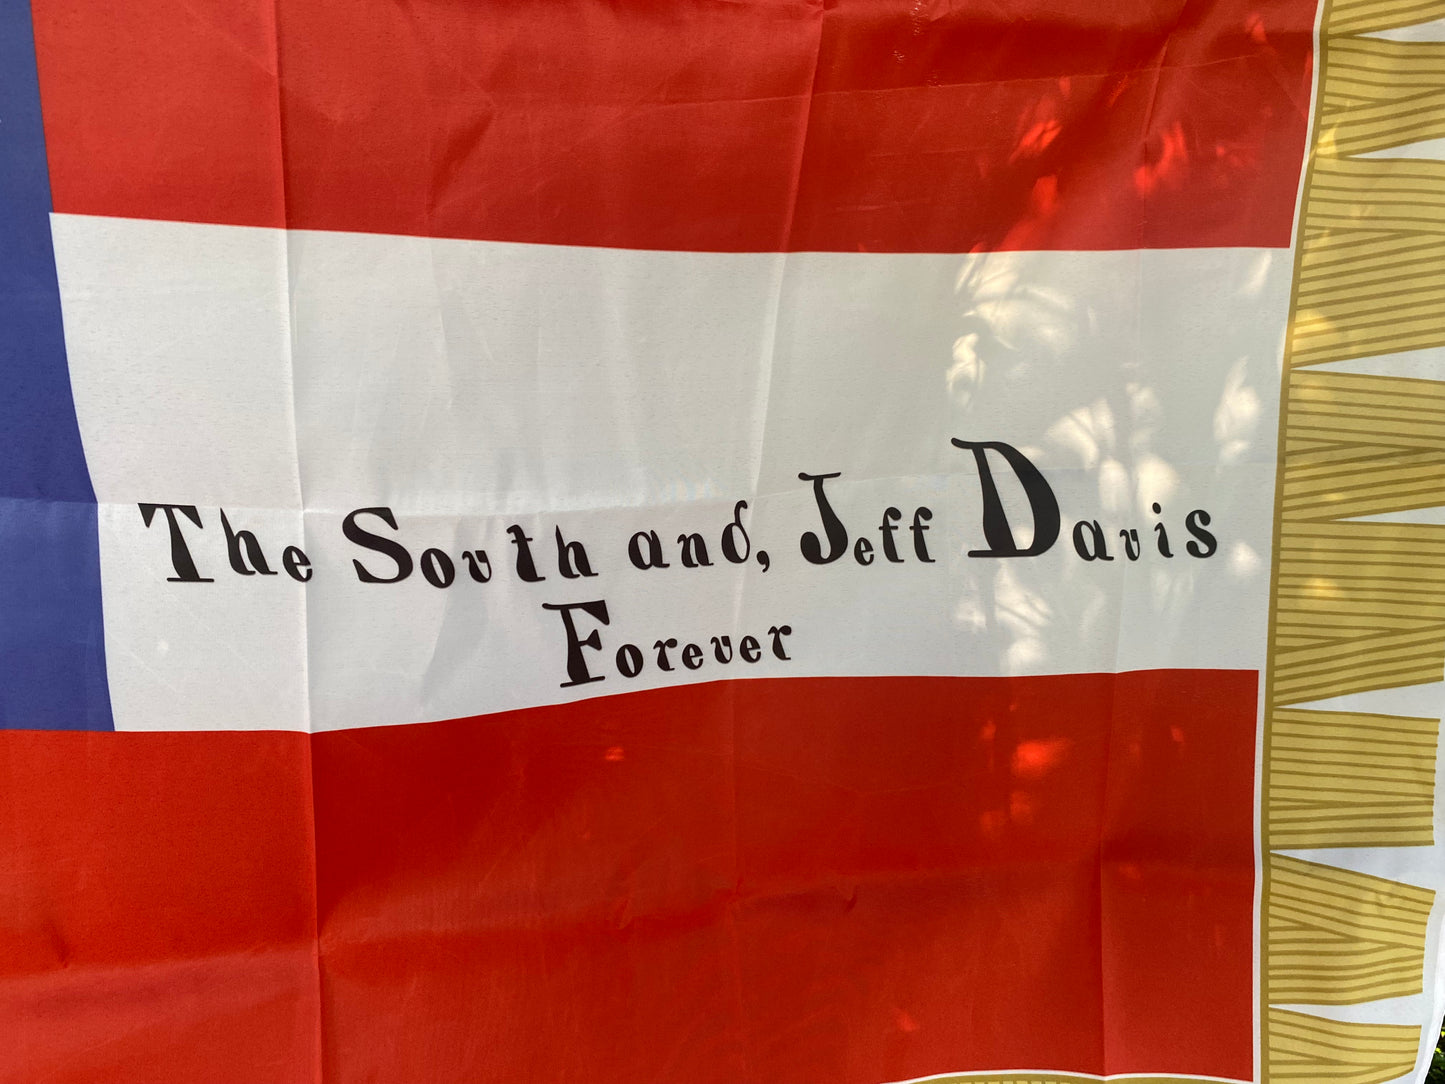 "The South and, Jeff Davis Forever" 1st Louisiana Cavalry 1st National House Flag